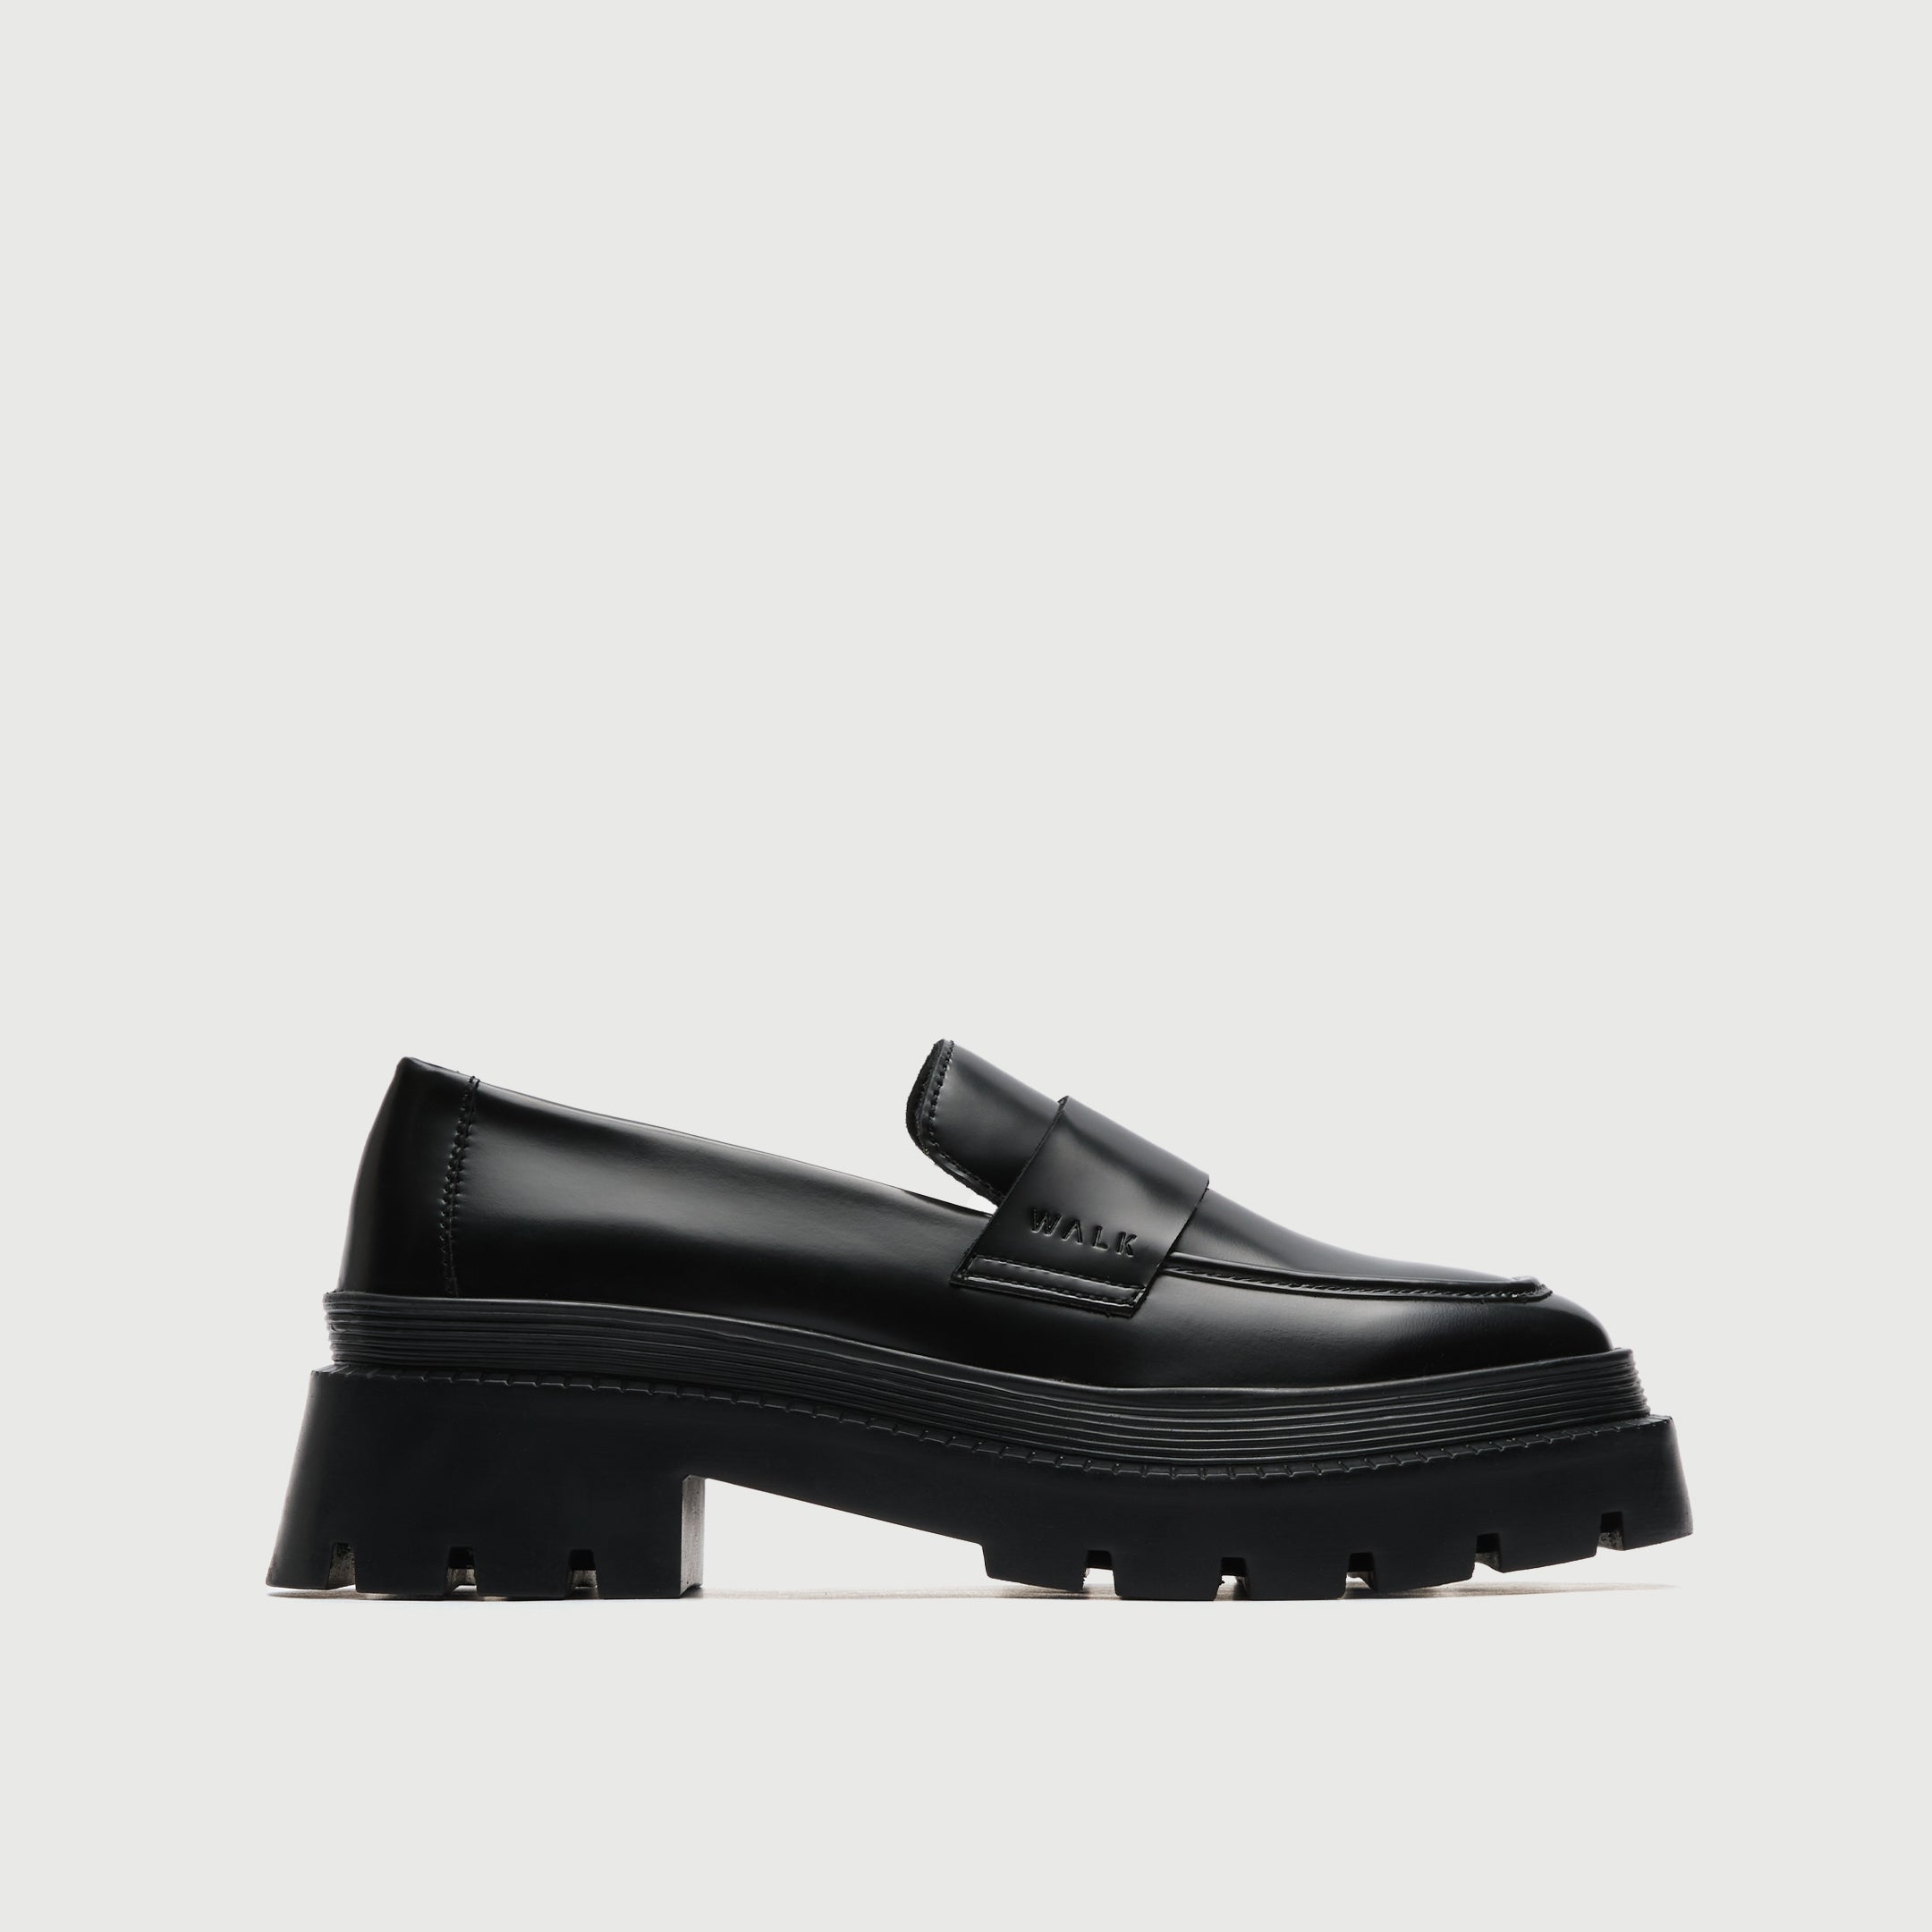 Walk London Womens Kate Saddle Loafer in Black Leather